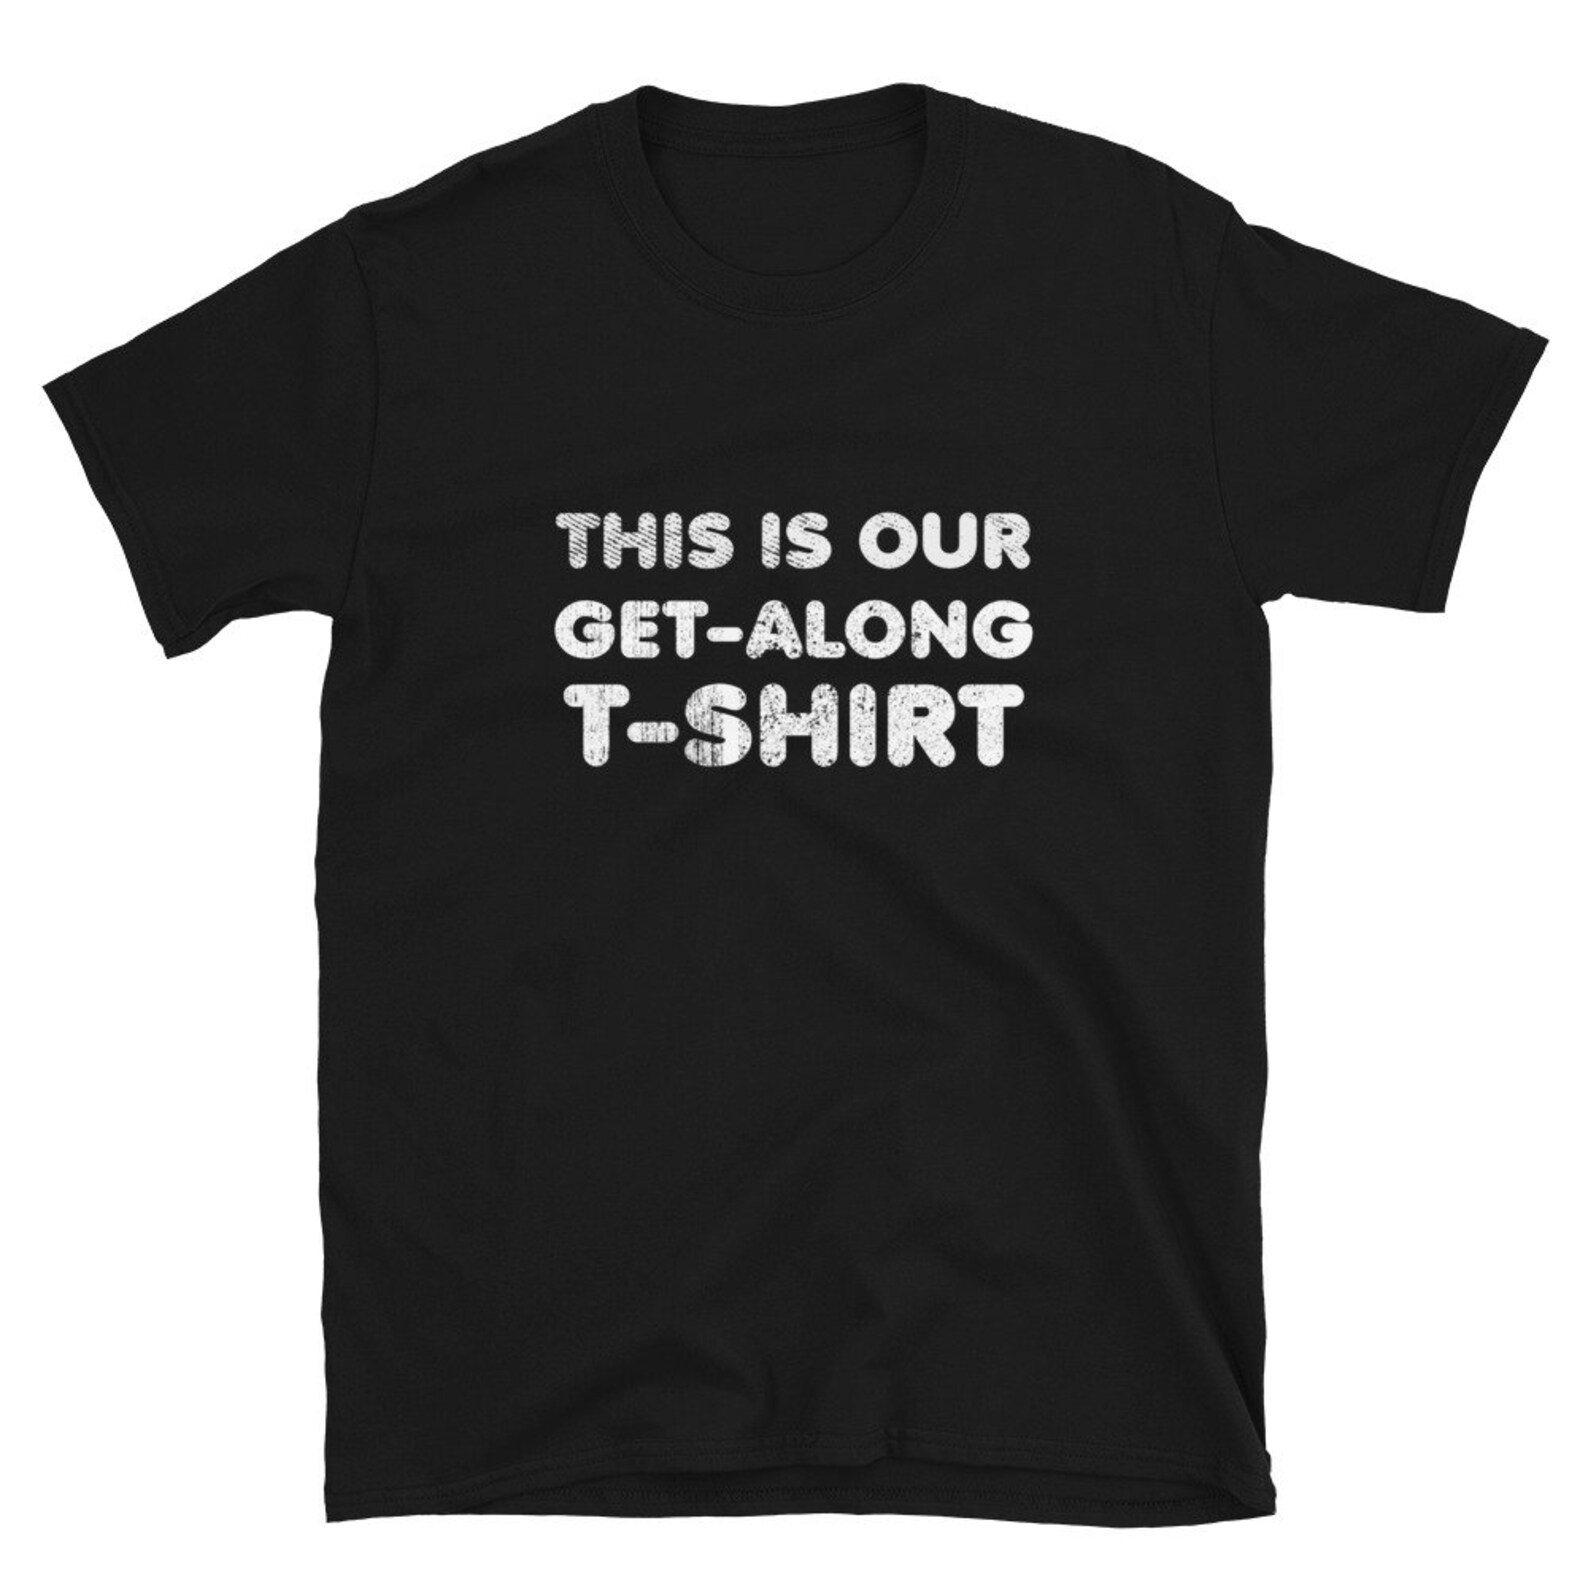 This is Our Get-along T-shirt Elections 2020 Debates - Etsy